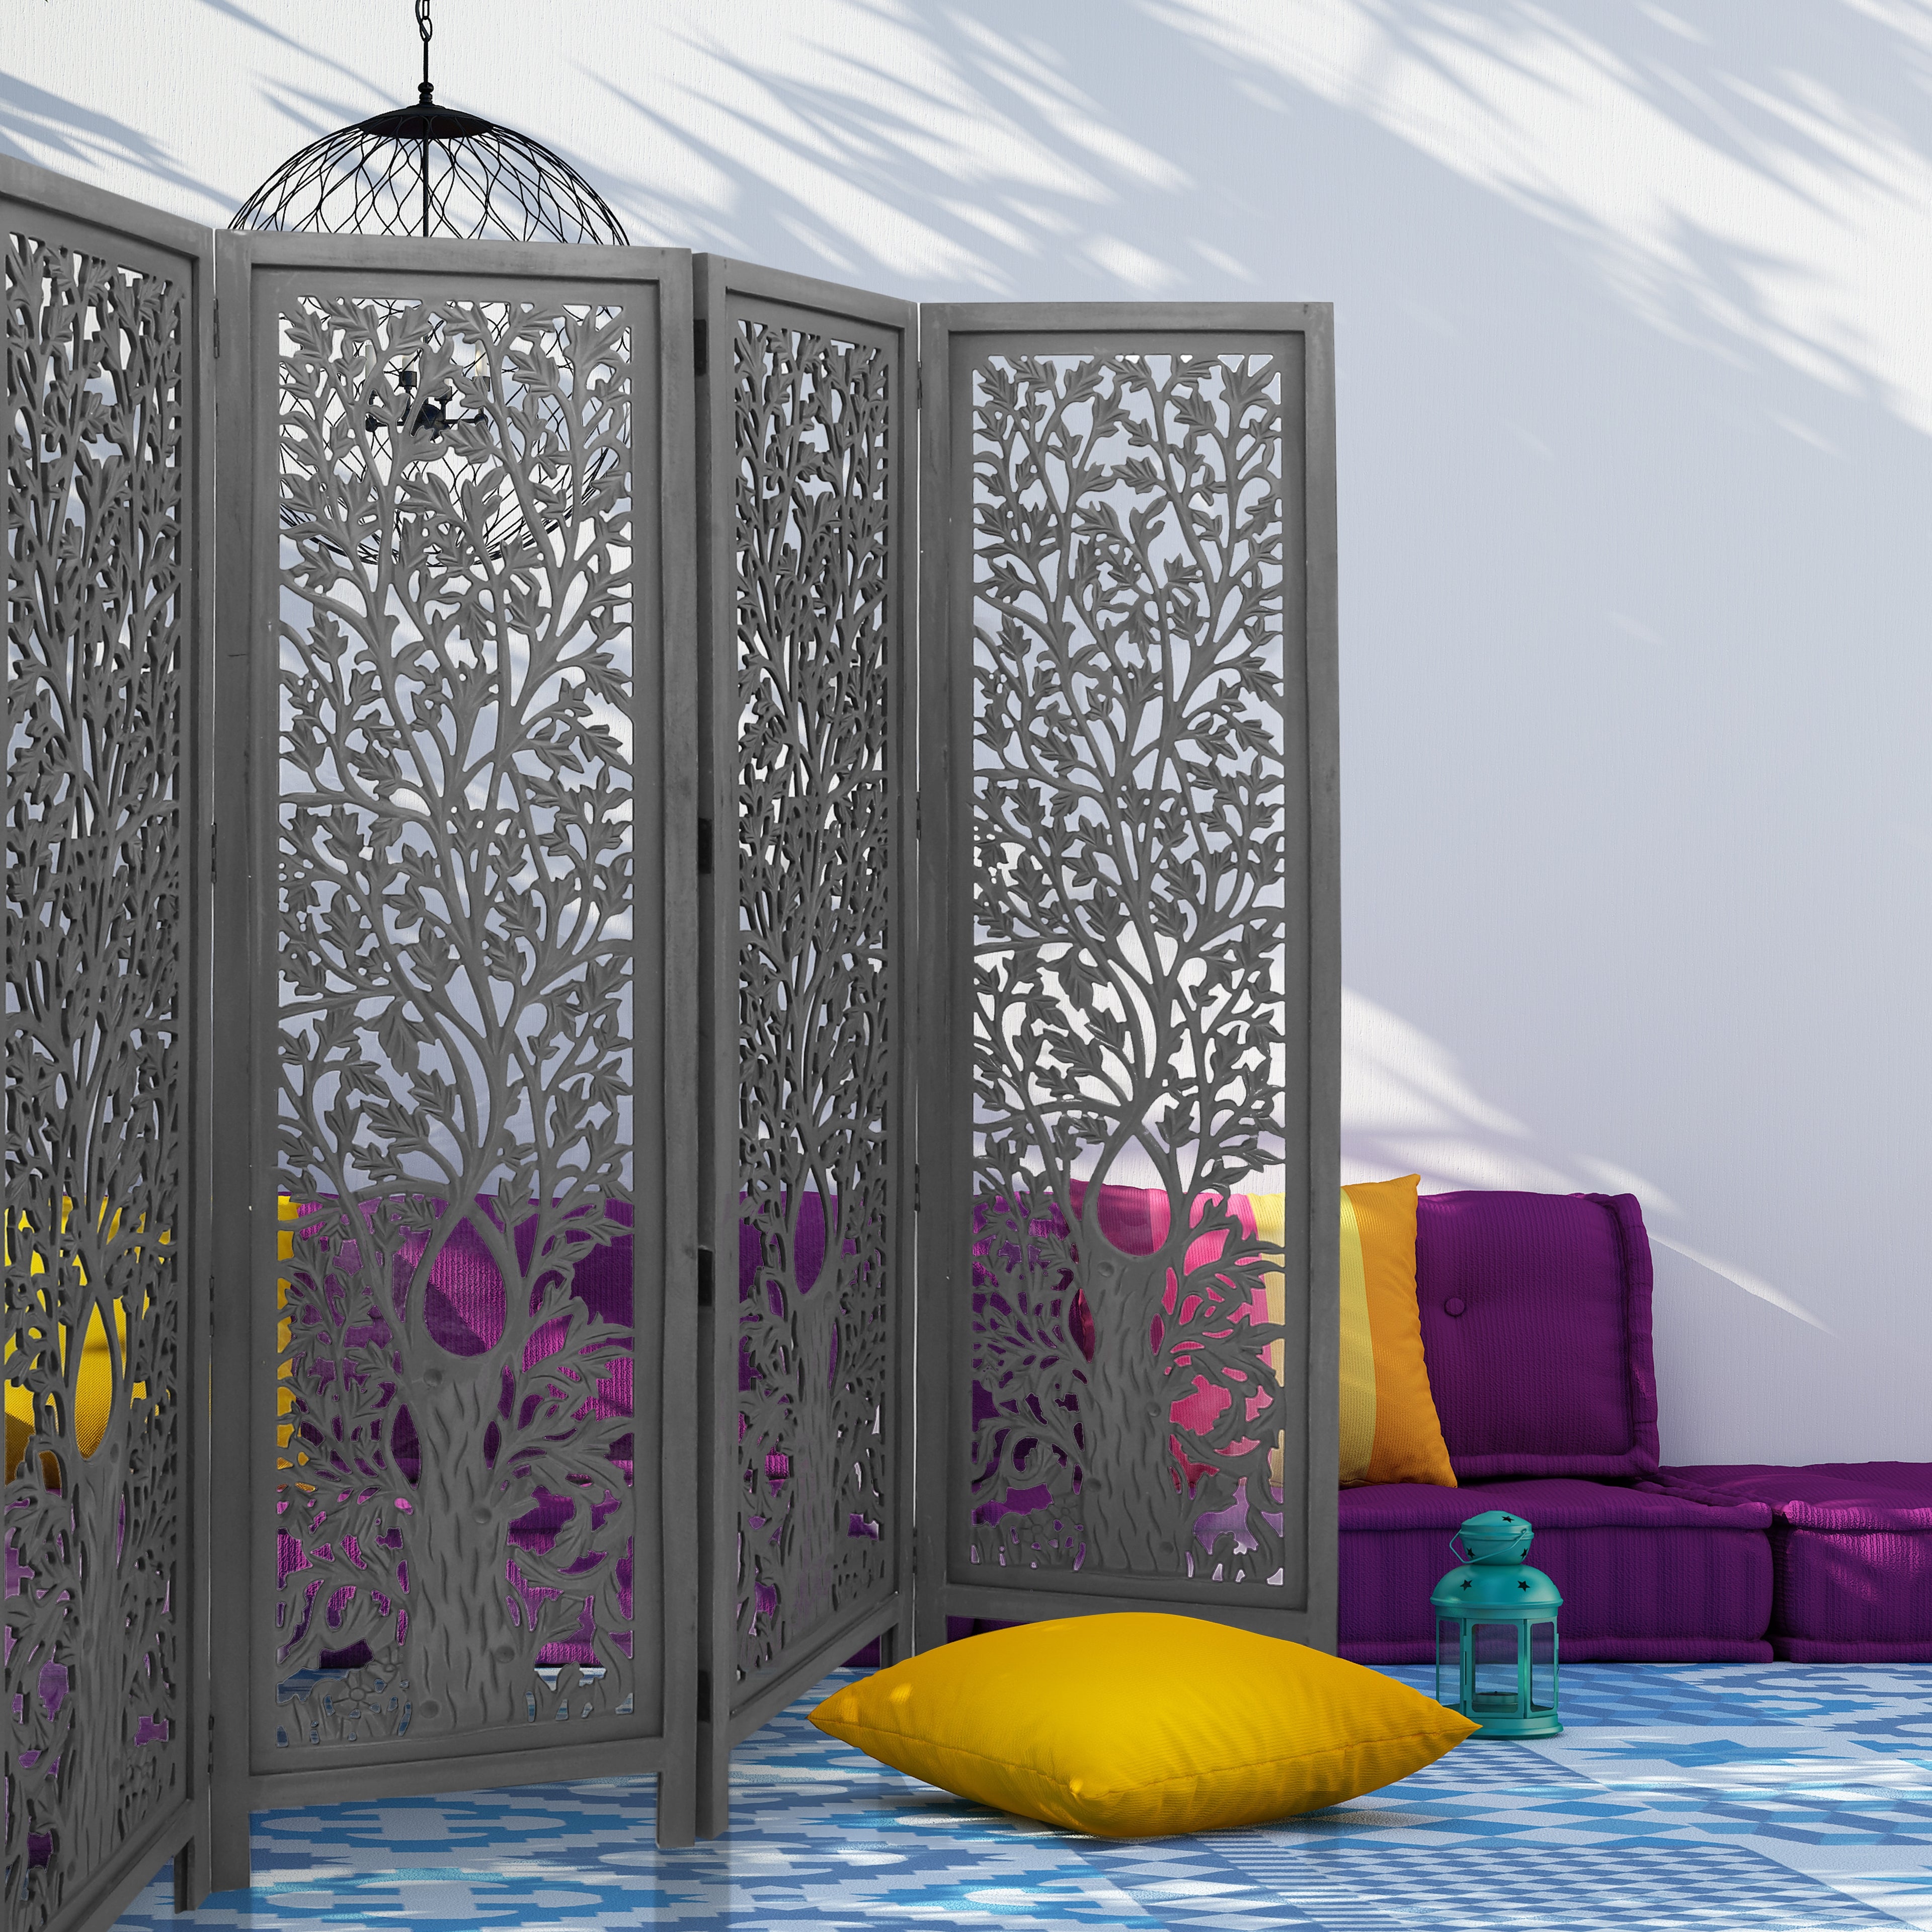 Dark Grey 4-Panel Room Divider Screen for Privacy